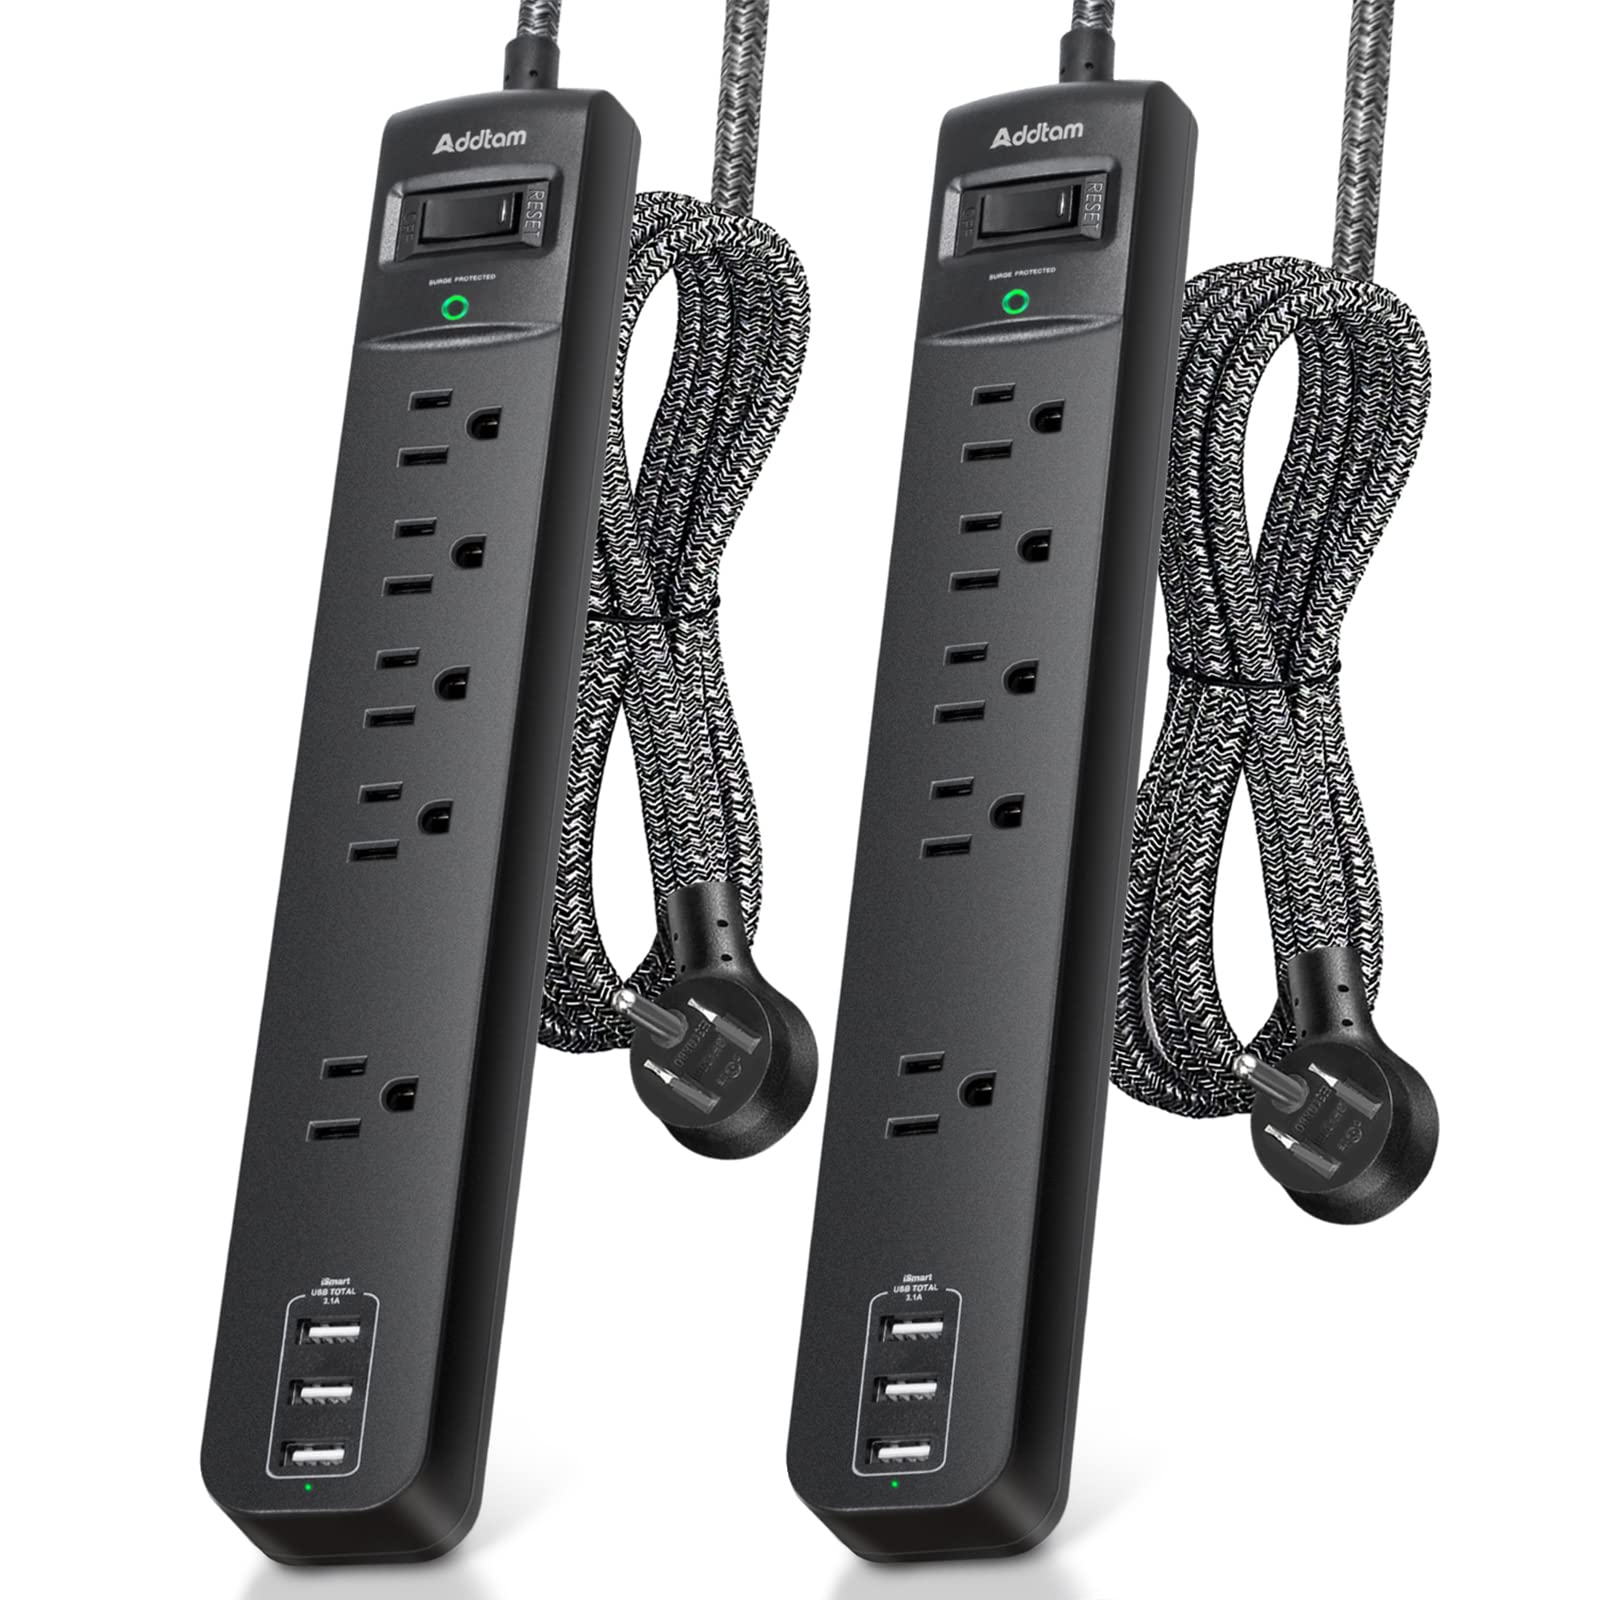 2 Pack Power Strip Surge Protector - 5 Widely Spaced Outlets 3 USB Charging Ports $18.91